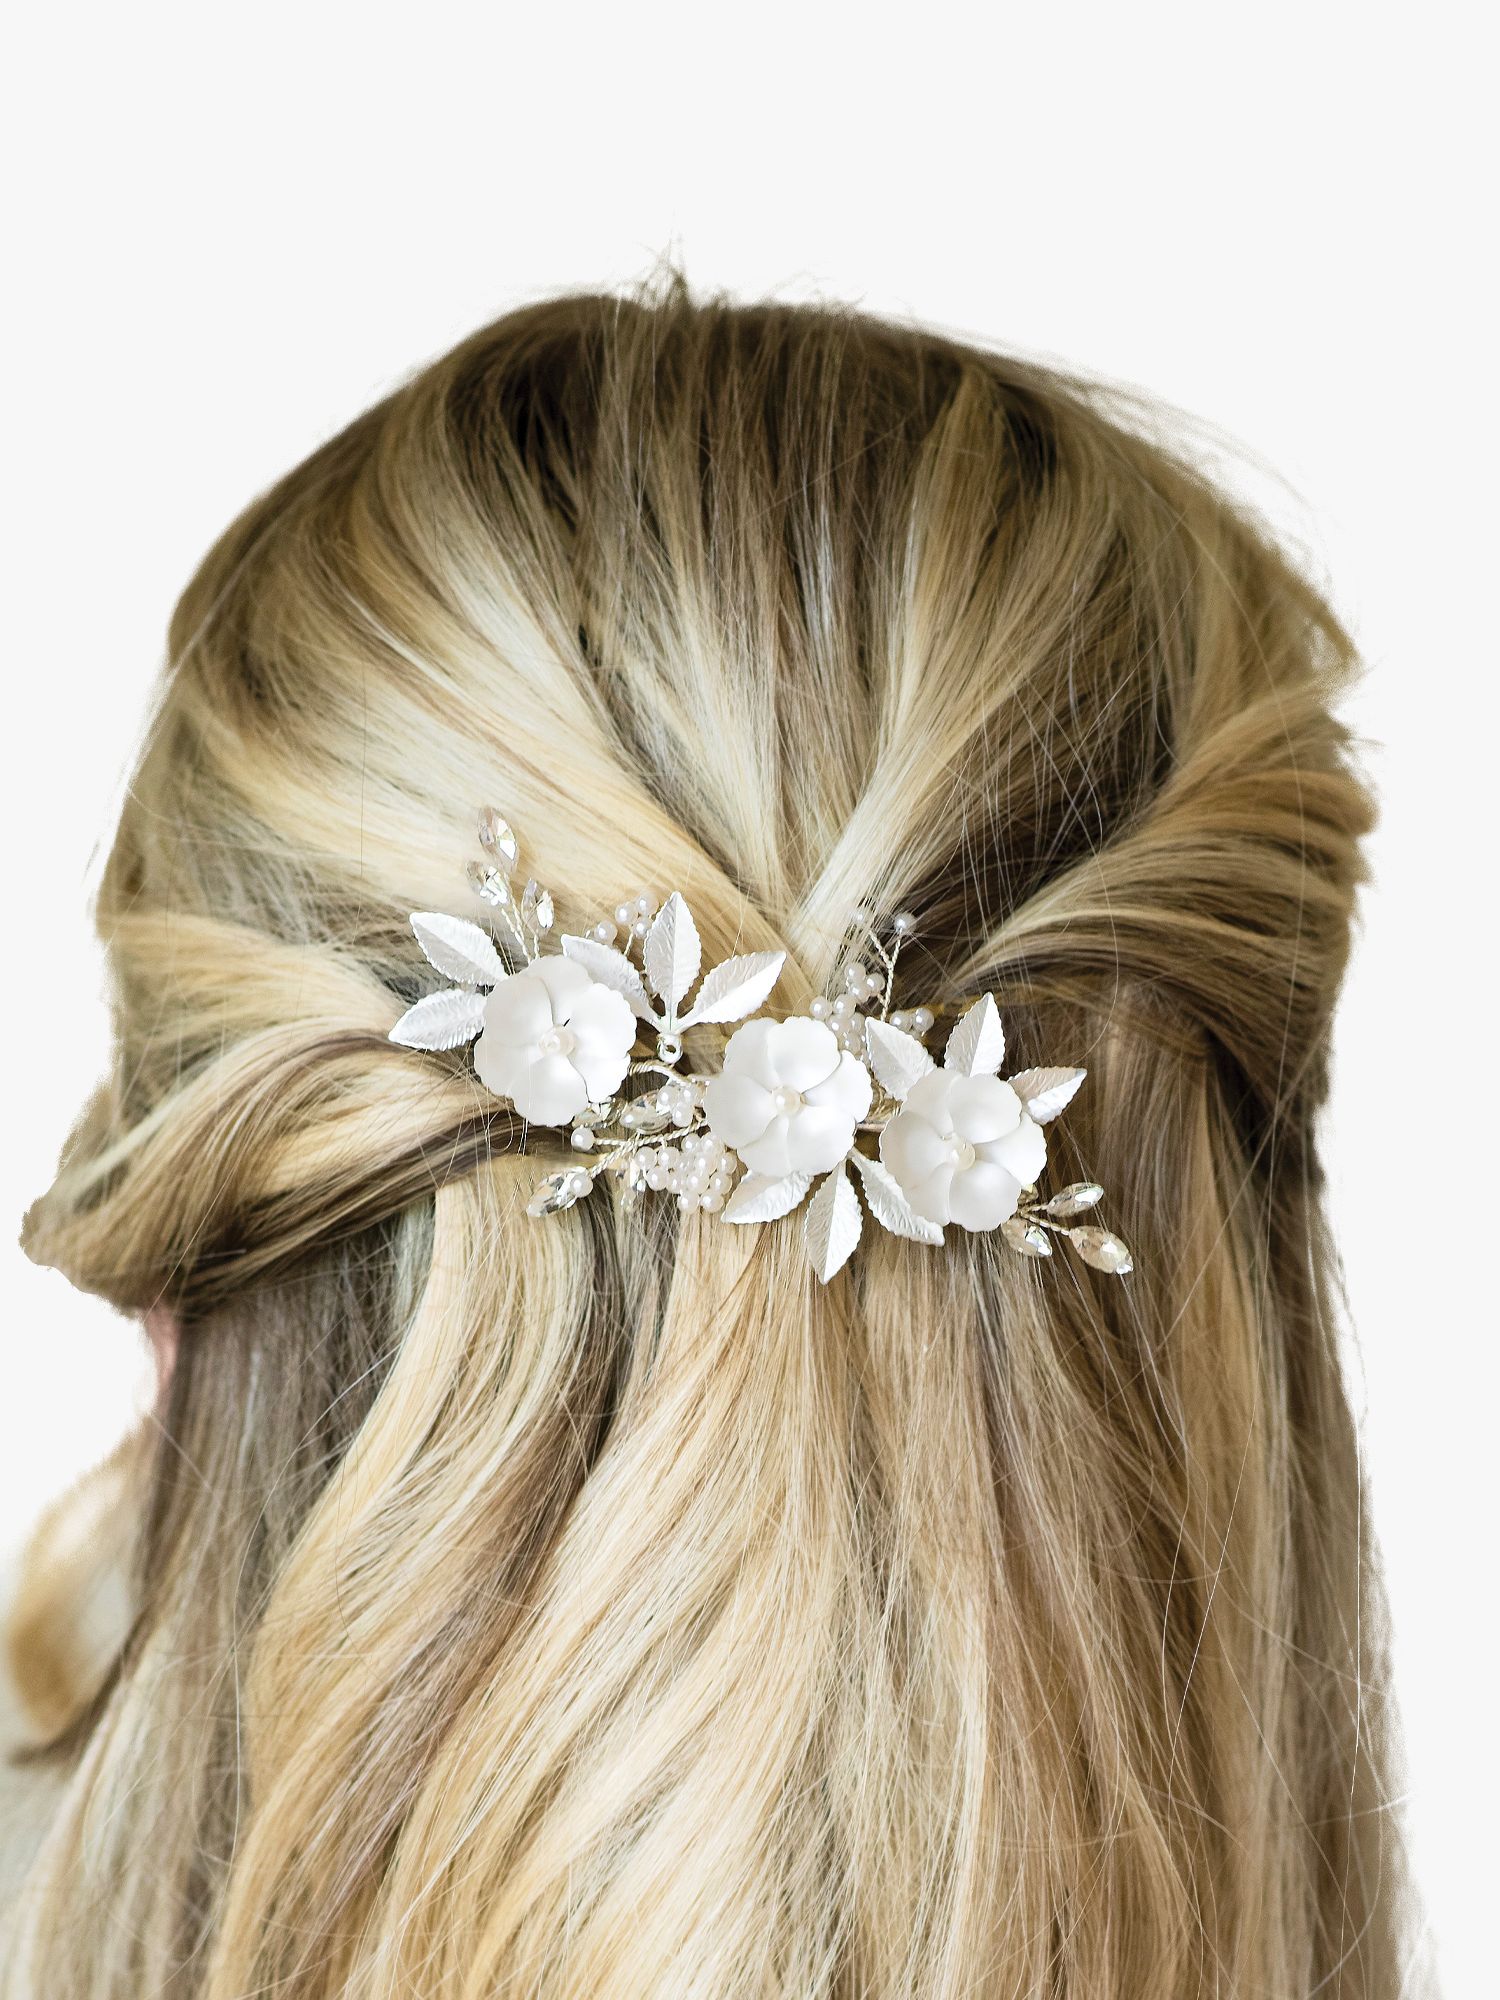 Buy Ivory & Co. Gardenia Crystal Silver Plated Hair Clip, Silver Online at johnlewis.com